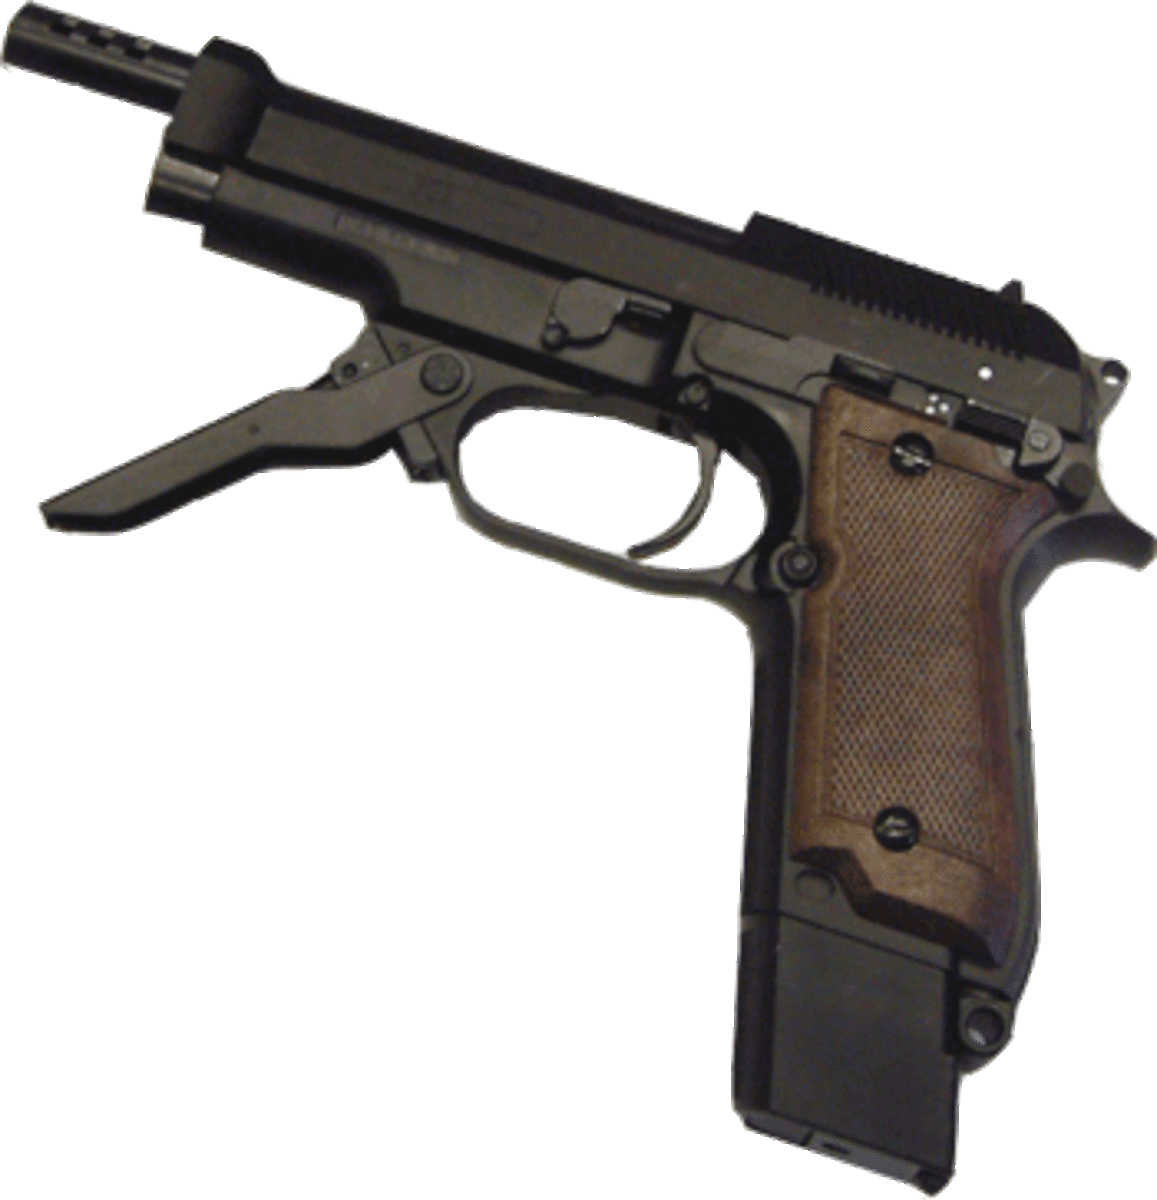 Jieke produced one of the earliest clones of the TM original gun, putting the AEP in the affordable price range